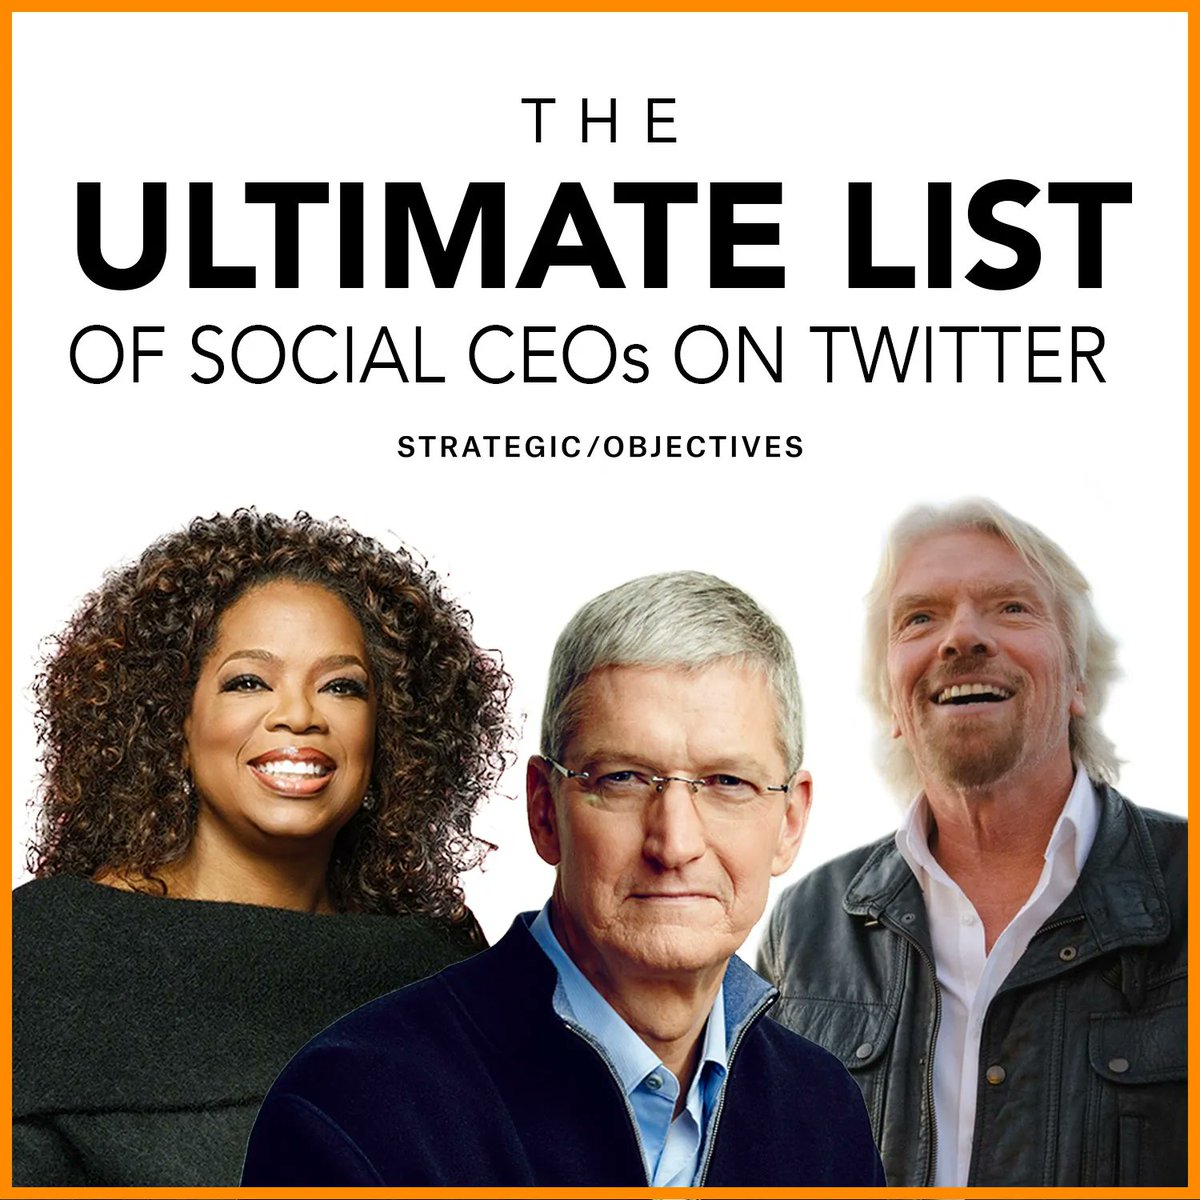 More than 850 CEOs grace @SO_pr’s Ultimate List of Social CEOs On Twitter. Our list now grows with @yummytork , our newest addition. Deets and Tweets here.  #SOcialceo #leadership   buff.ly/3JQmGzq